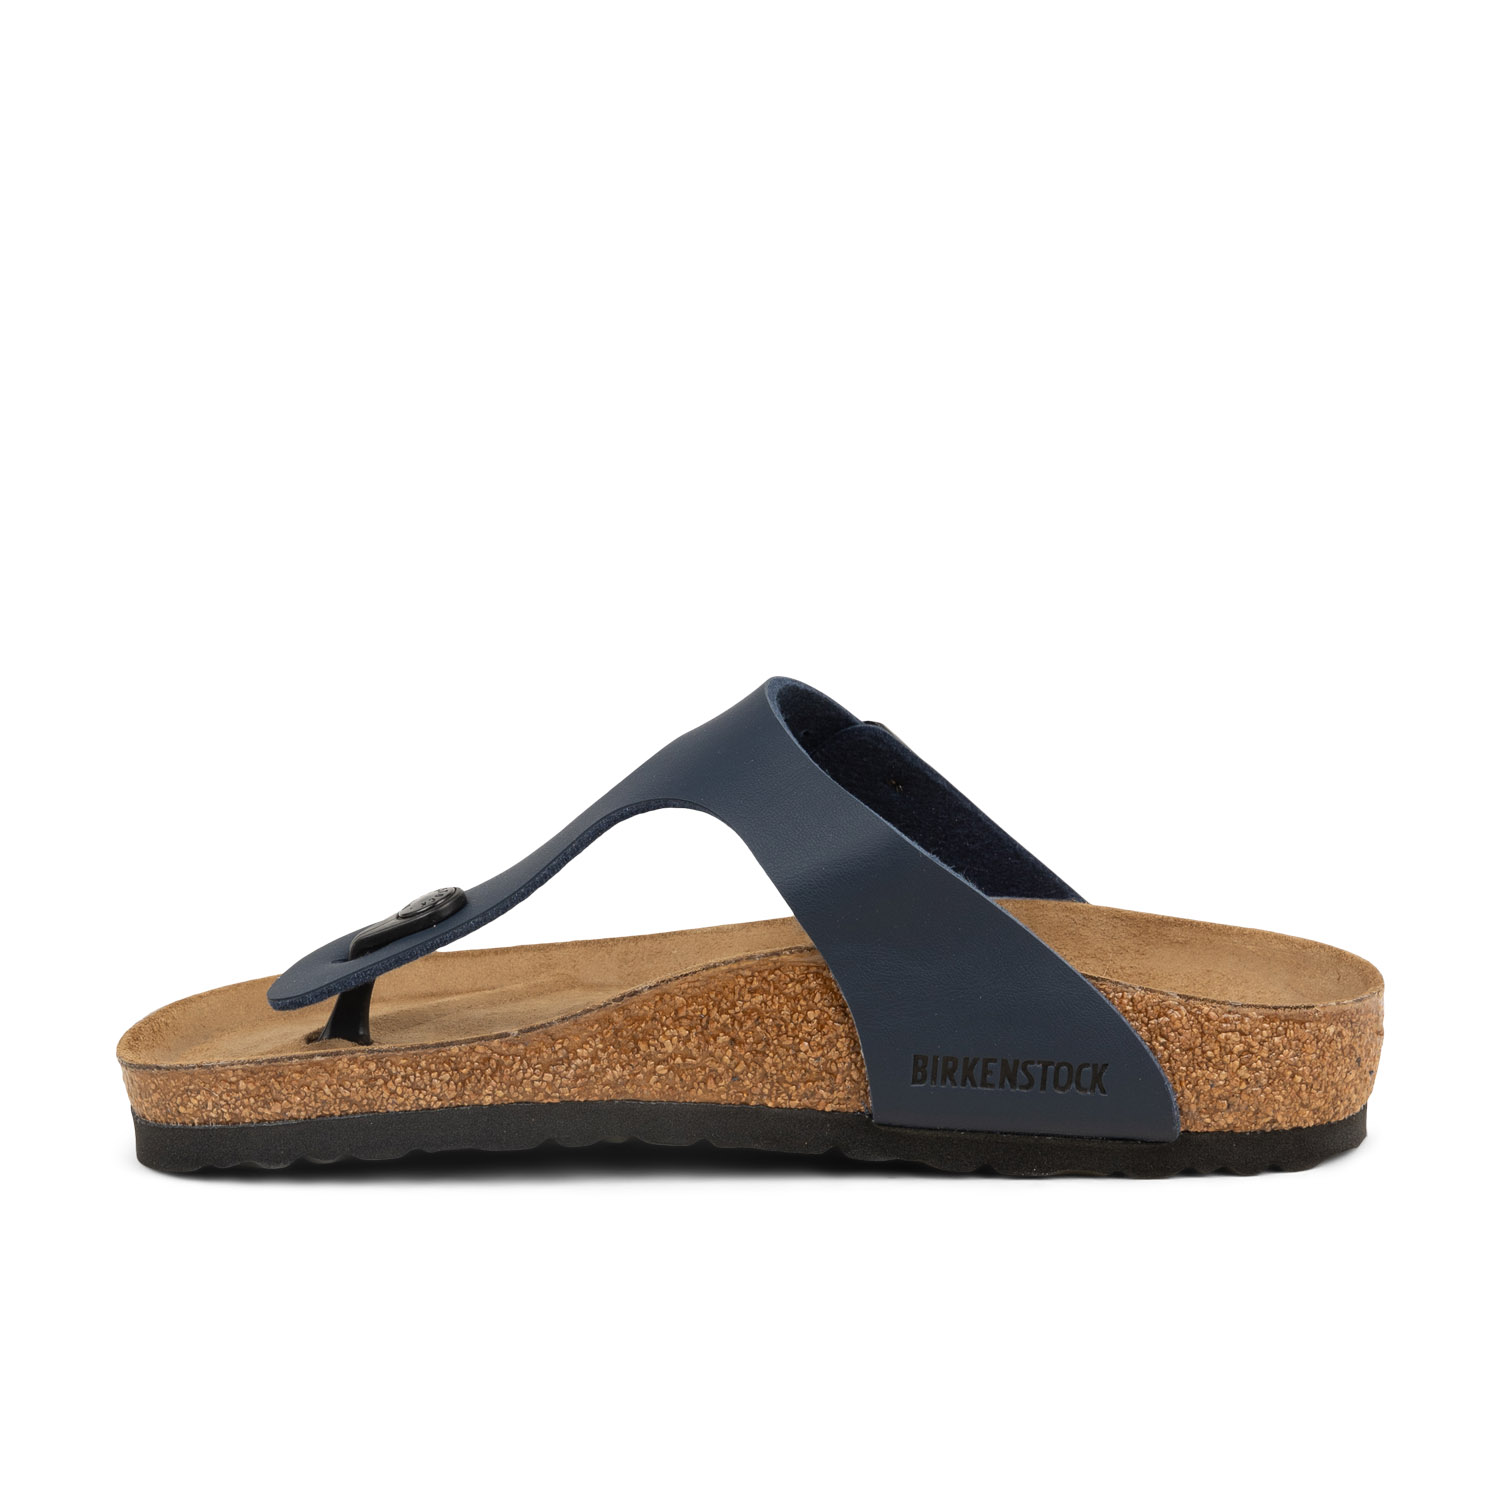 04 - GIZEH - BIRKENSTOCK -  - Cuir / synthétique